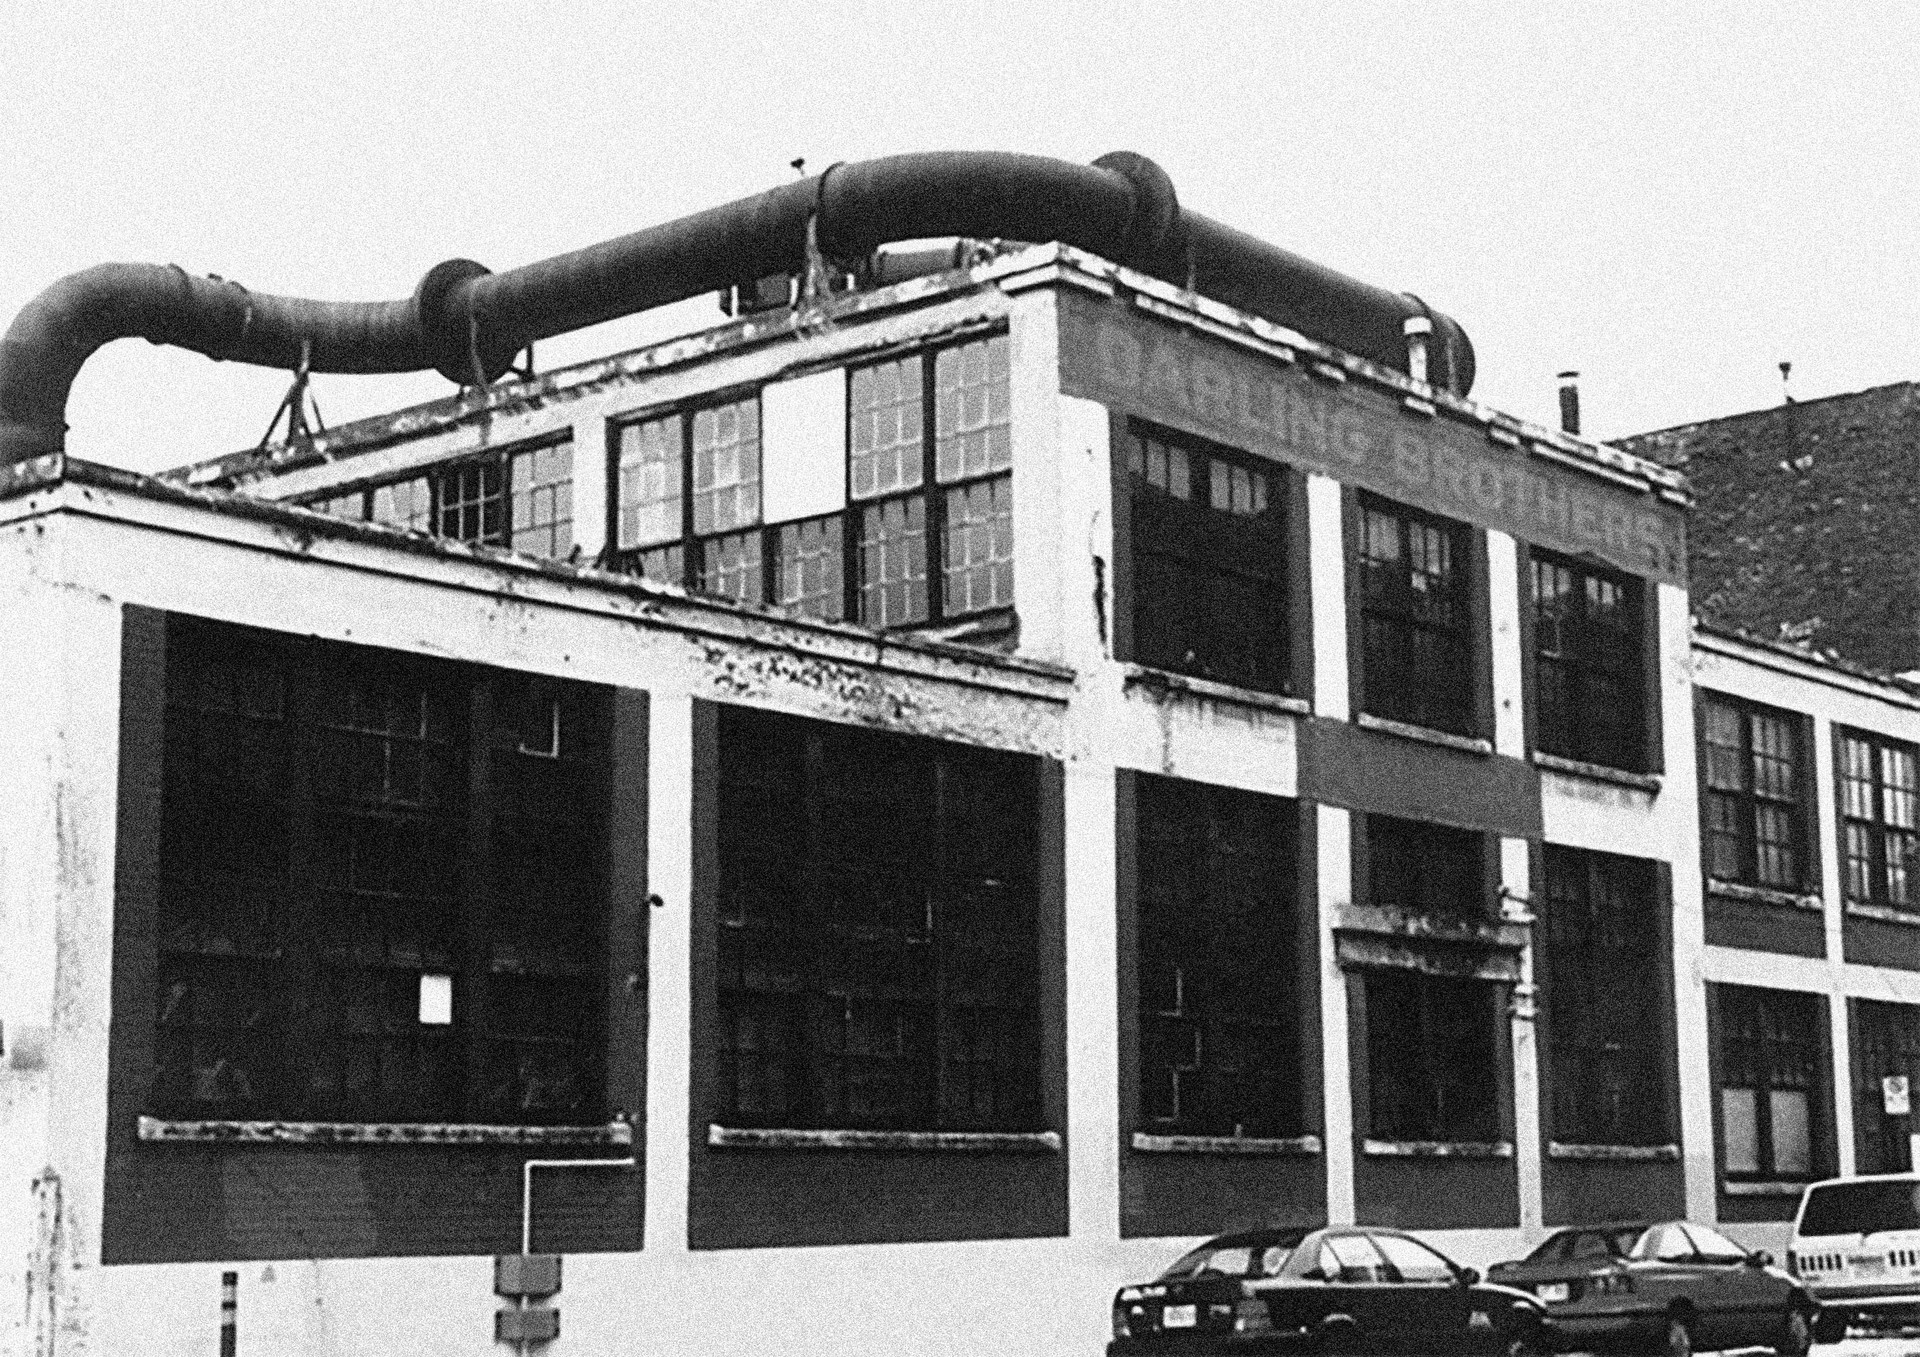 A black and white archival photo of an industrial building